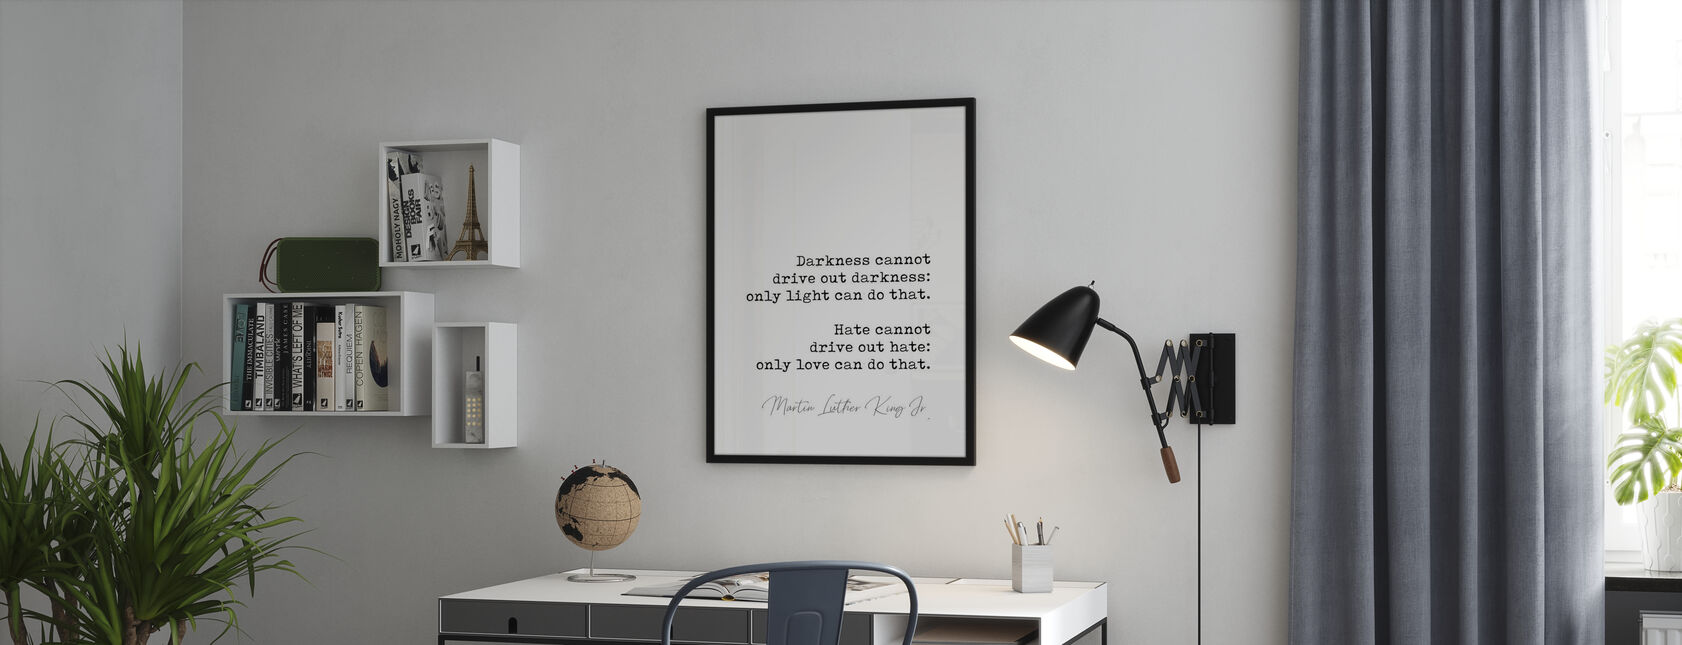 Martin Luther King Quote - Poster - Office